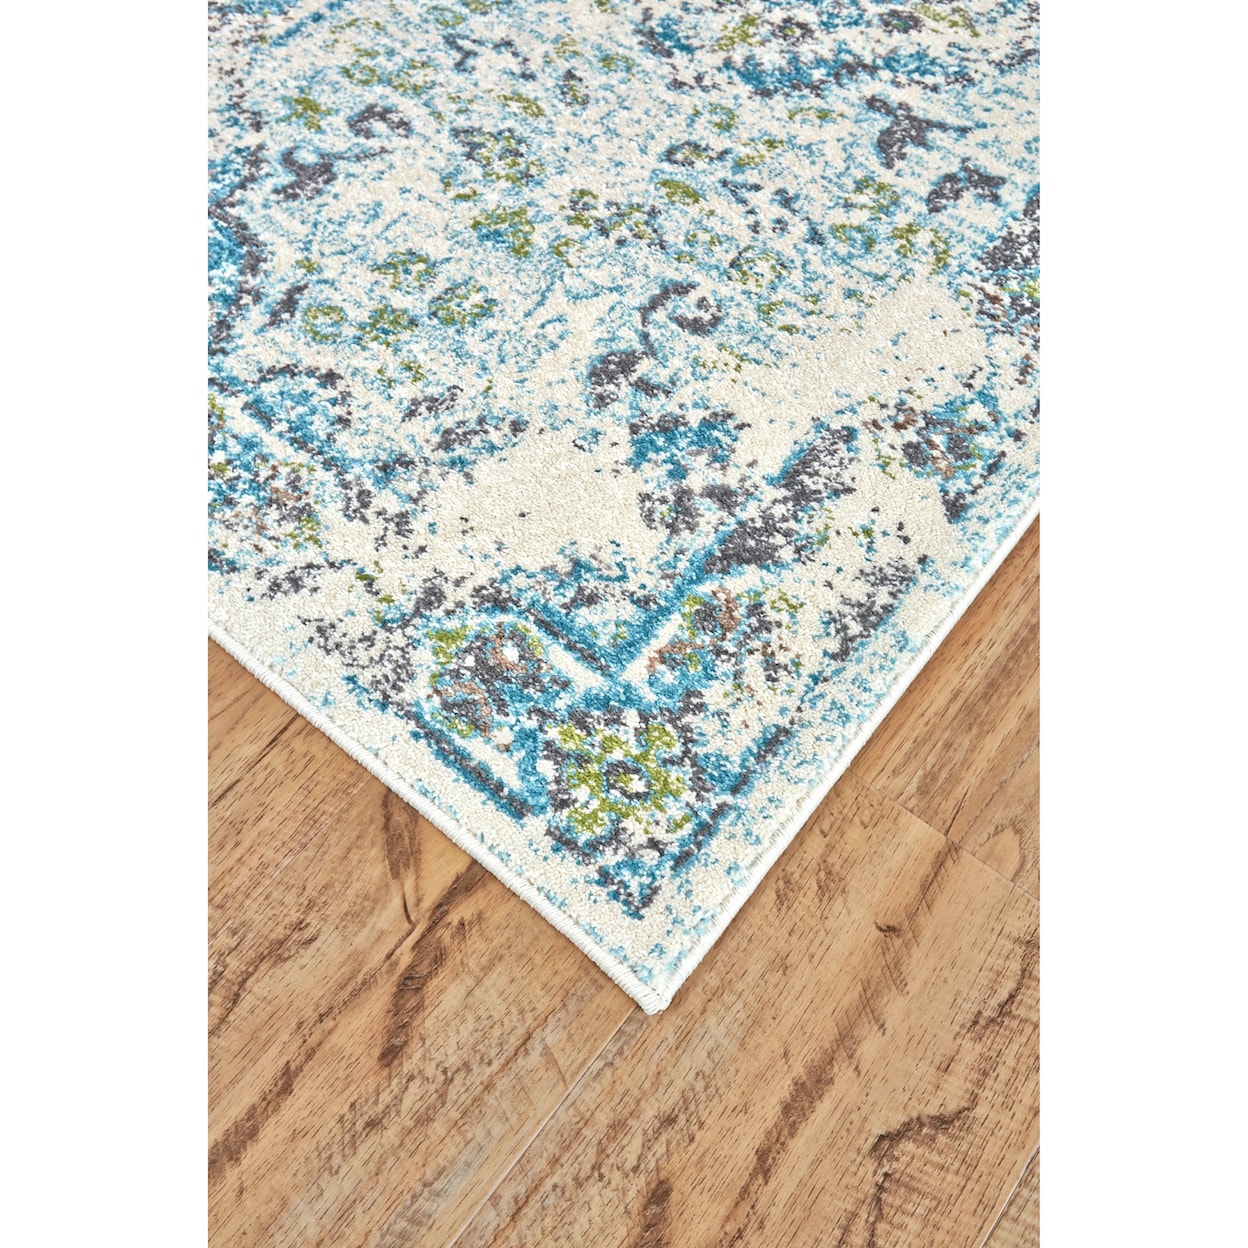 Feizy Rugs Harlow Meadow 8' X 11' Area Rug